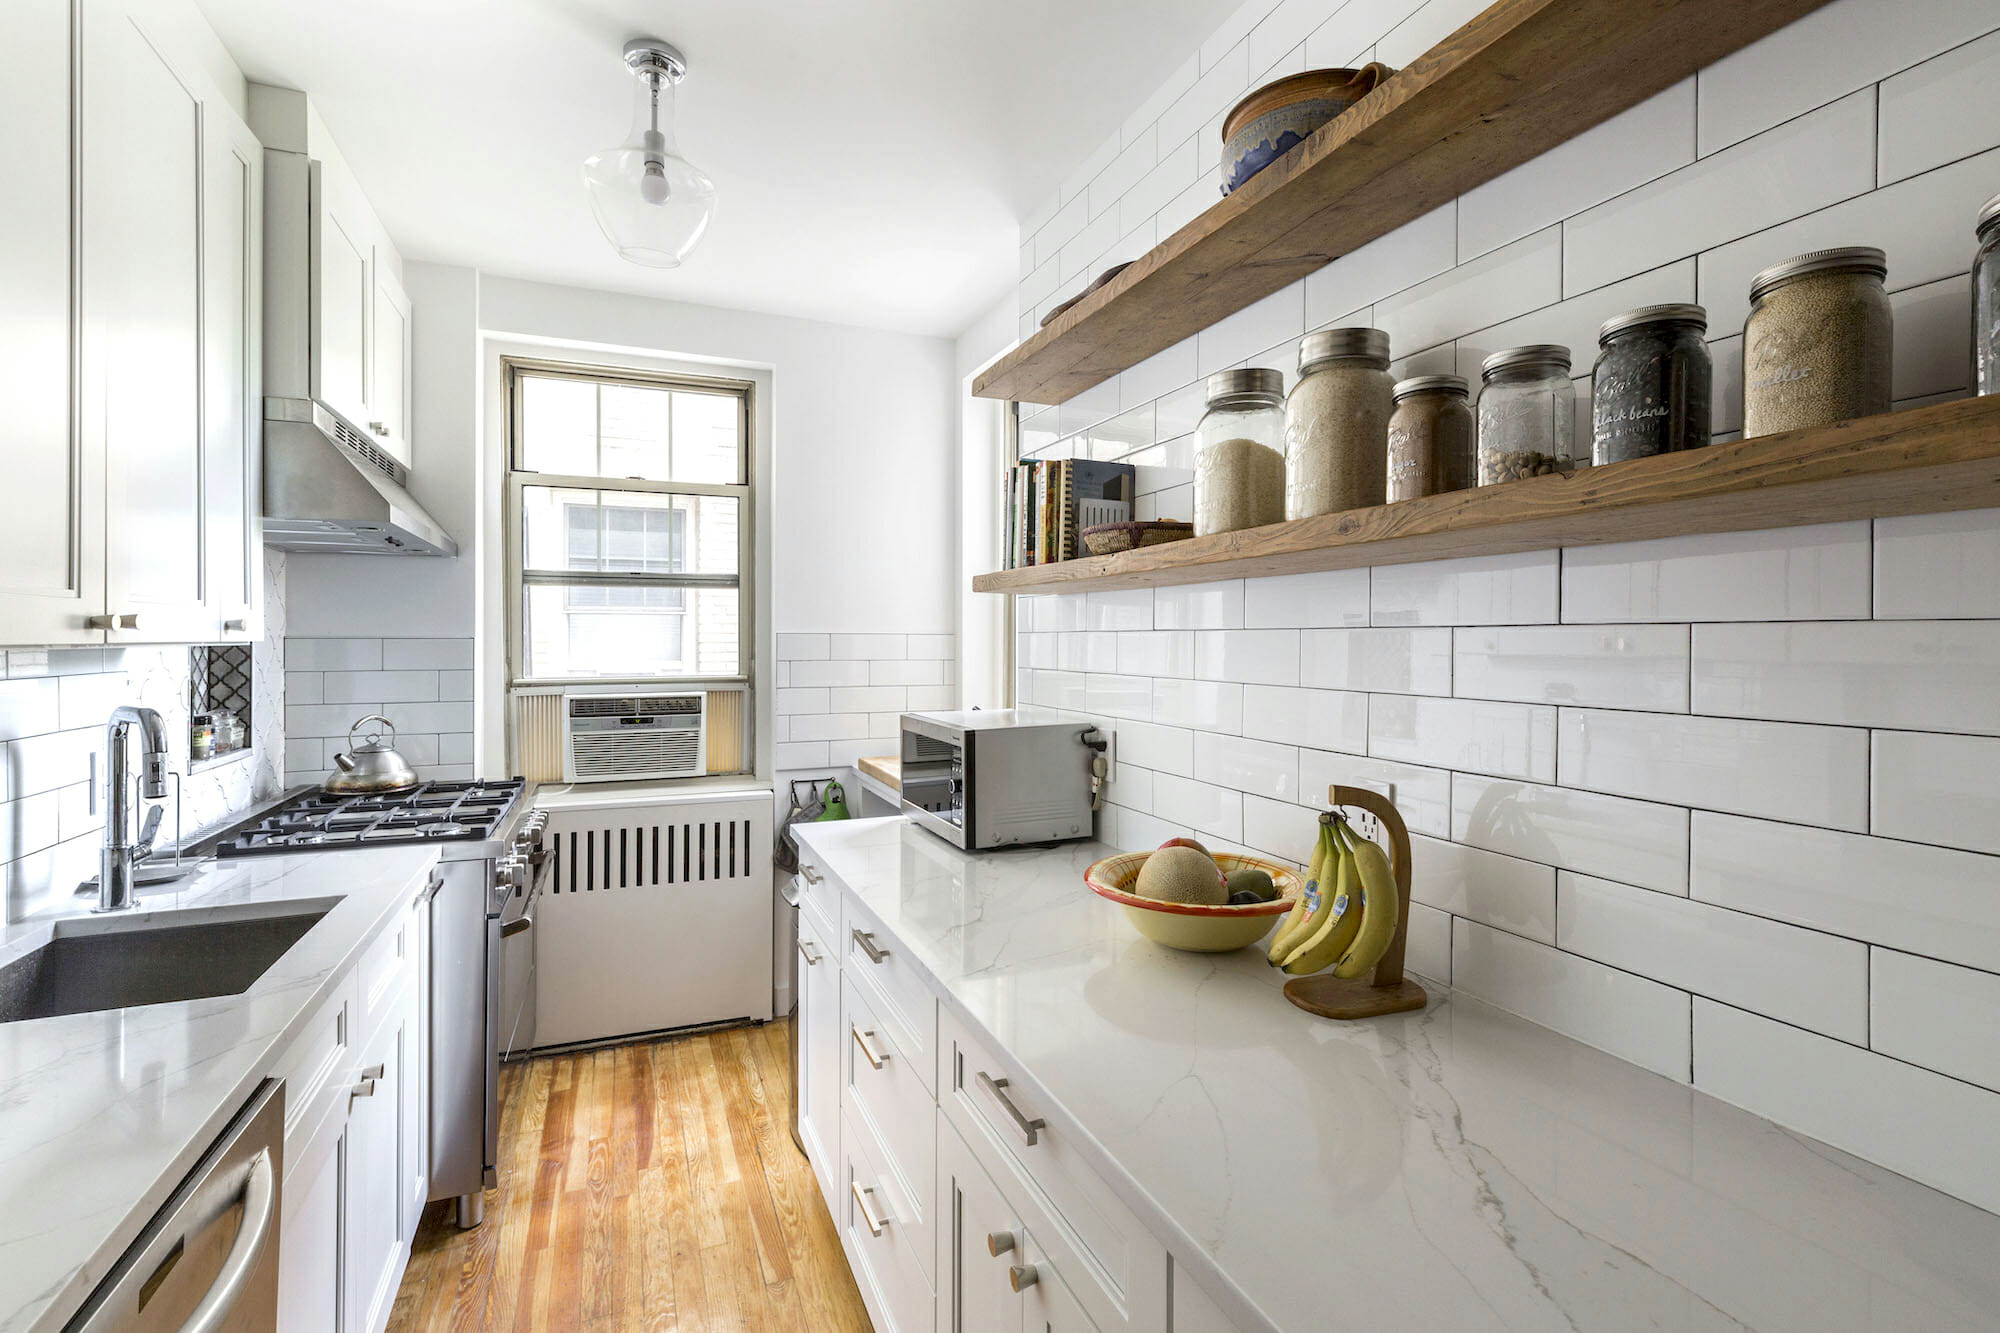 Image of an all-white remodeled galley kitchen with wooden floors